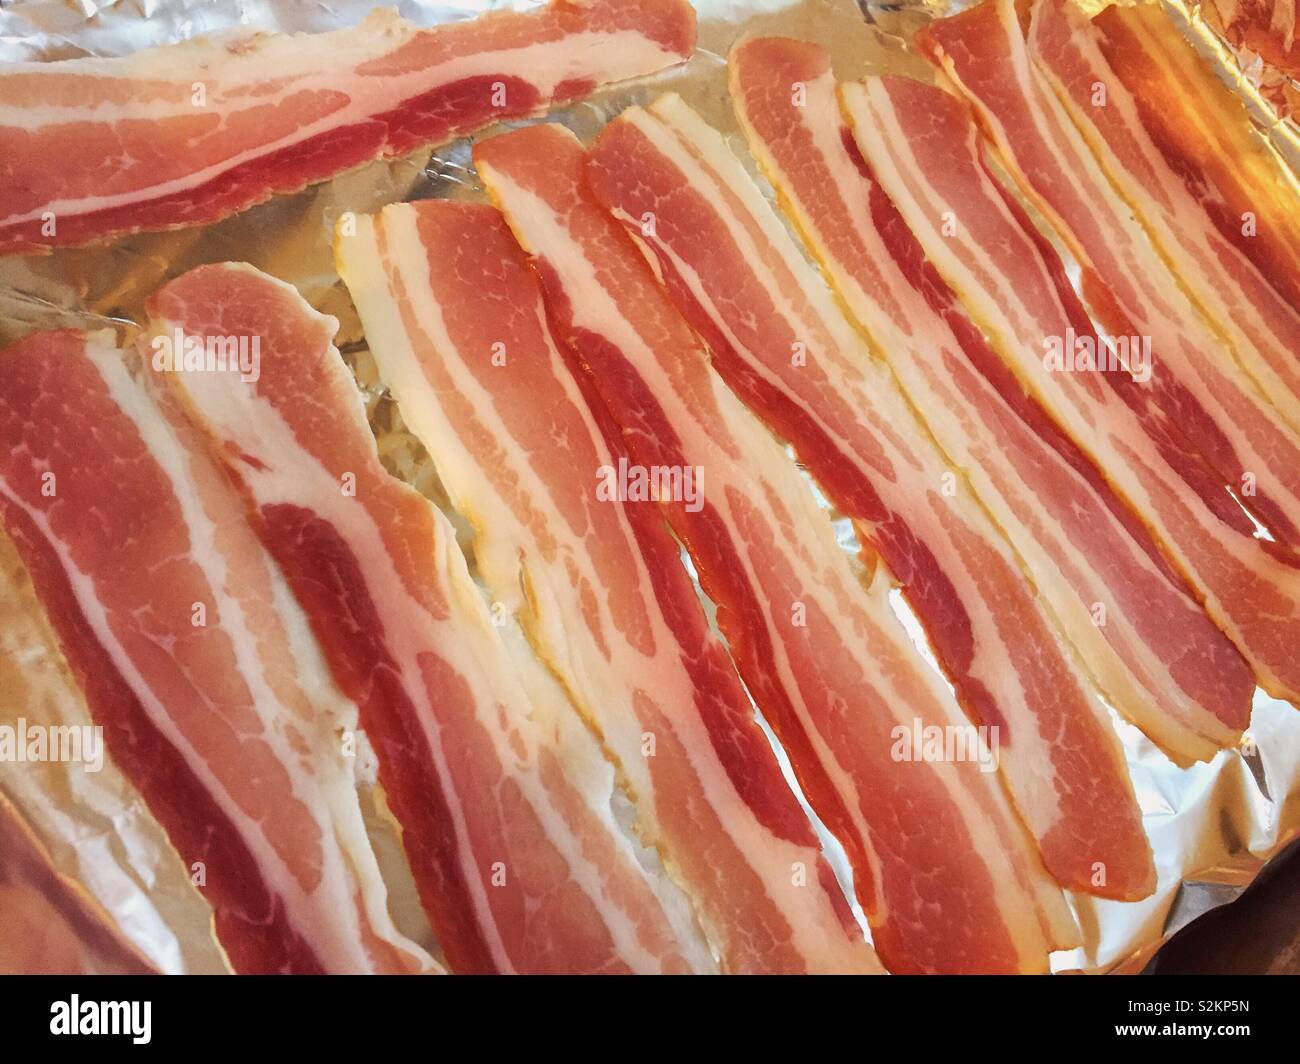 Tray of bacon.  Pancetta style streaky bacon ready to be grilled and cooked for breakfast.  Rasher or rashers linked to cancer Stock Photo